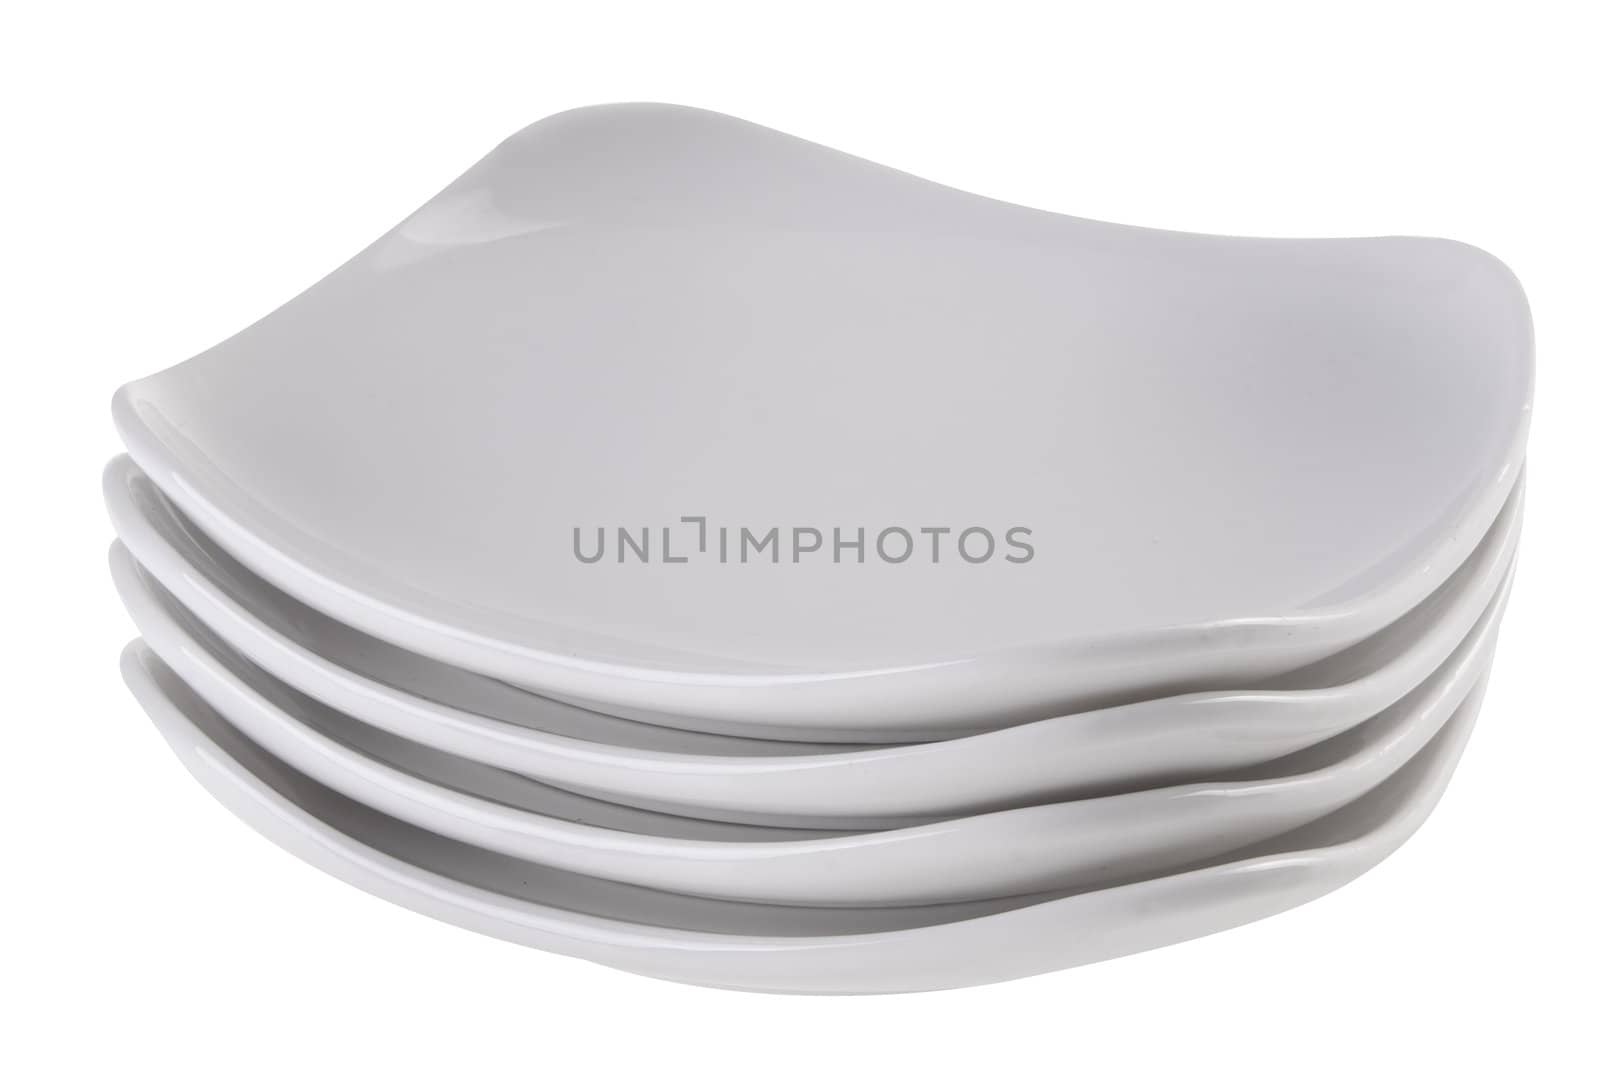 plates on the white background